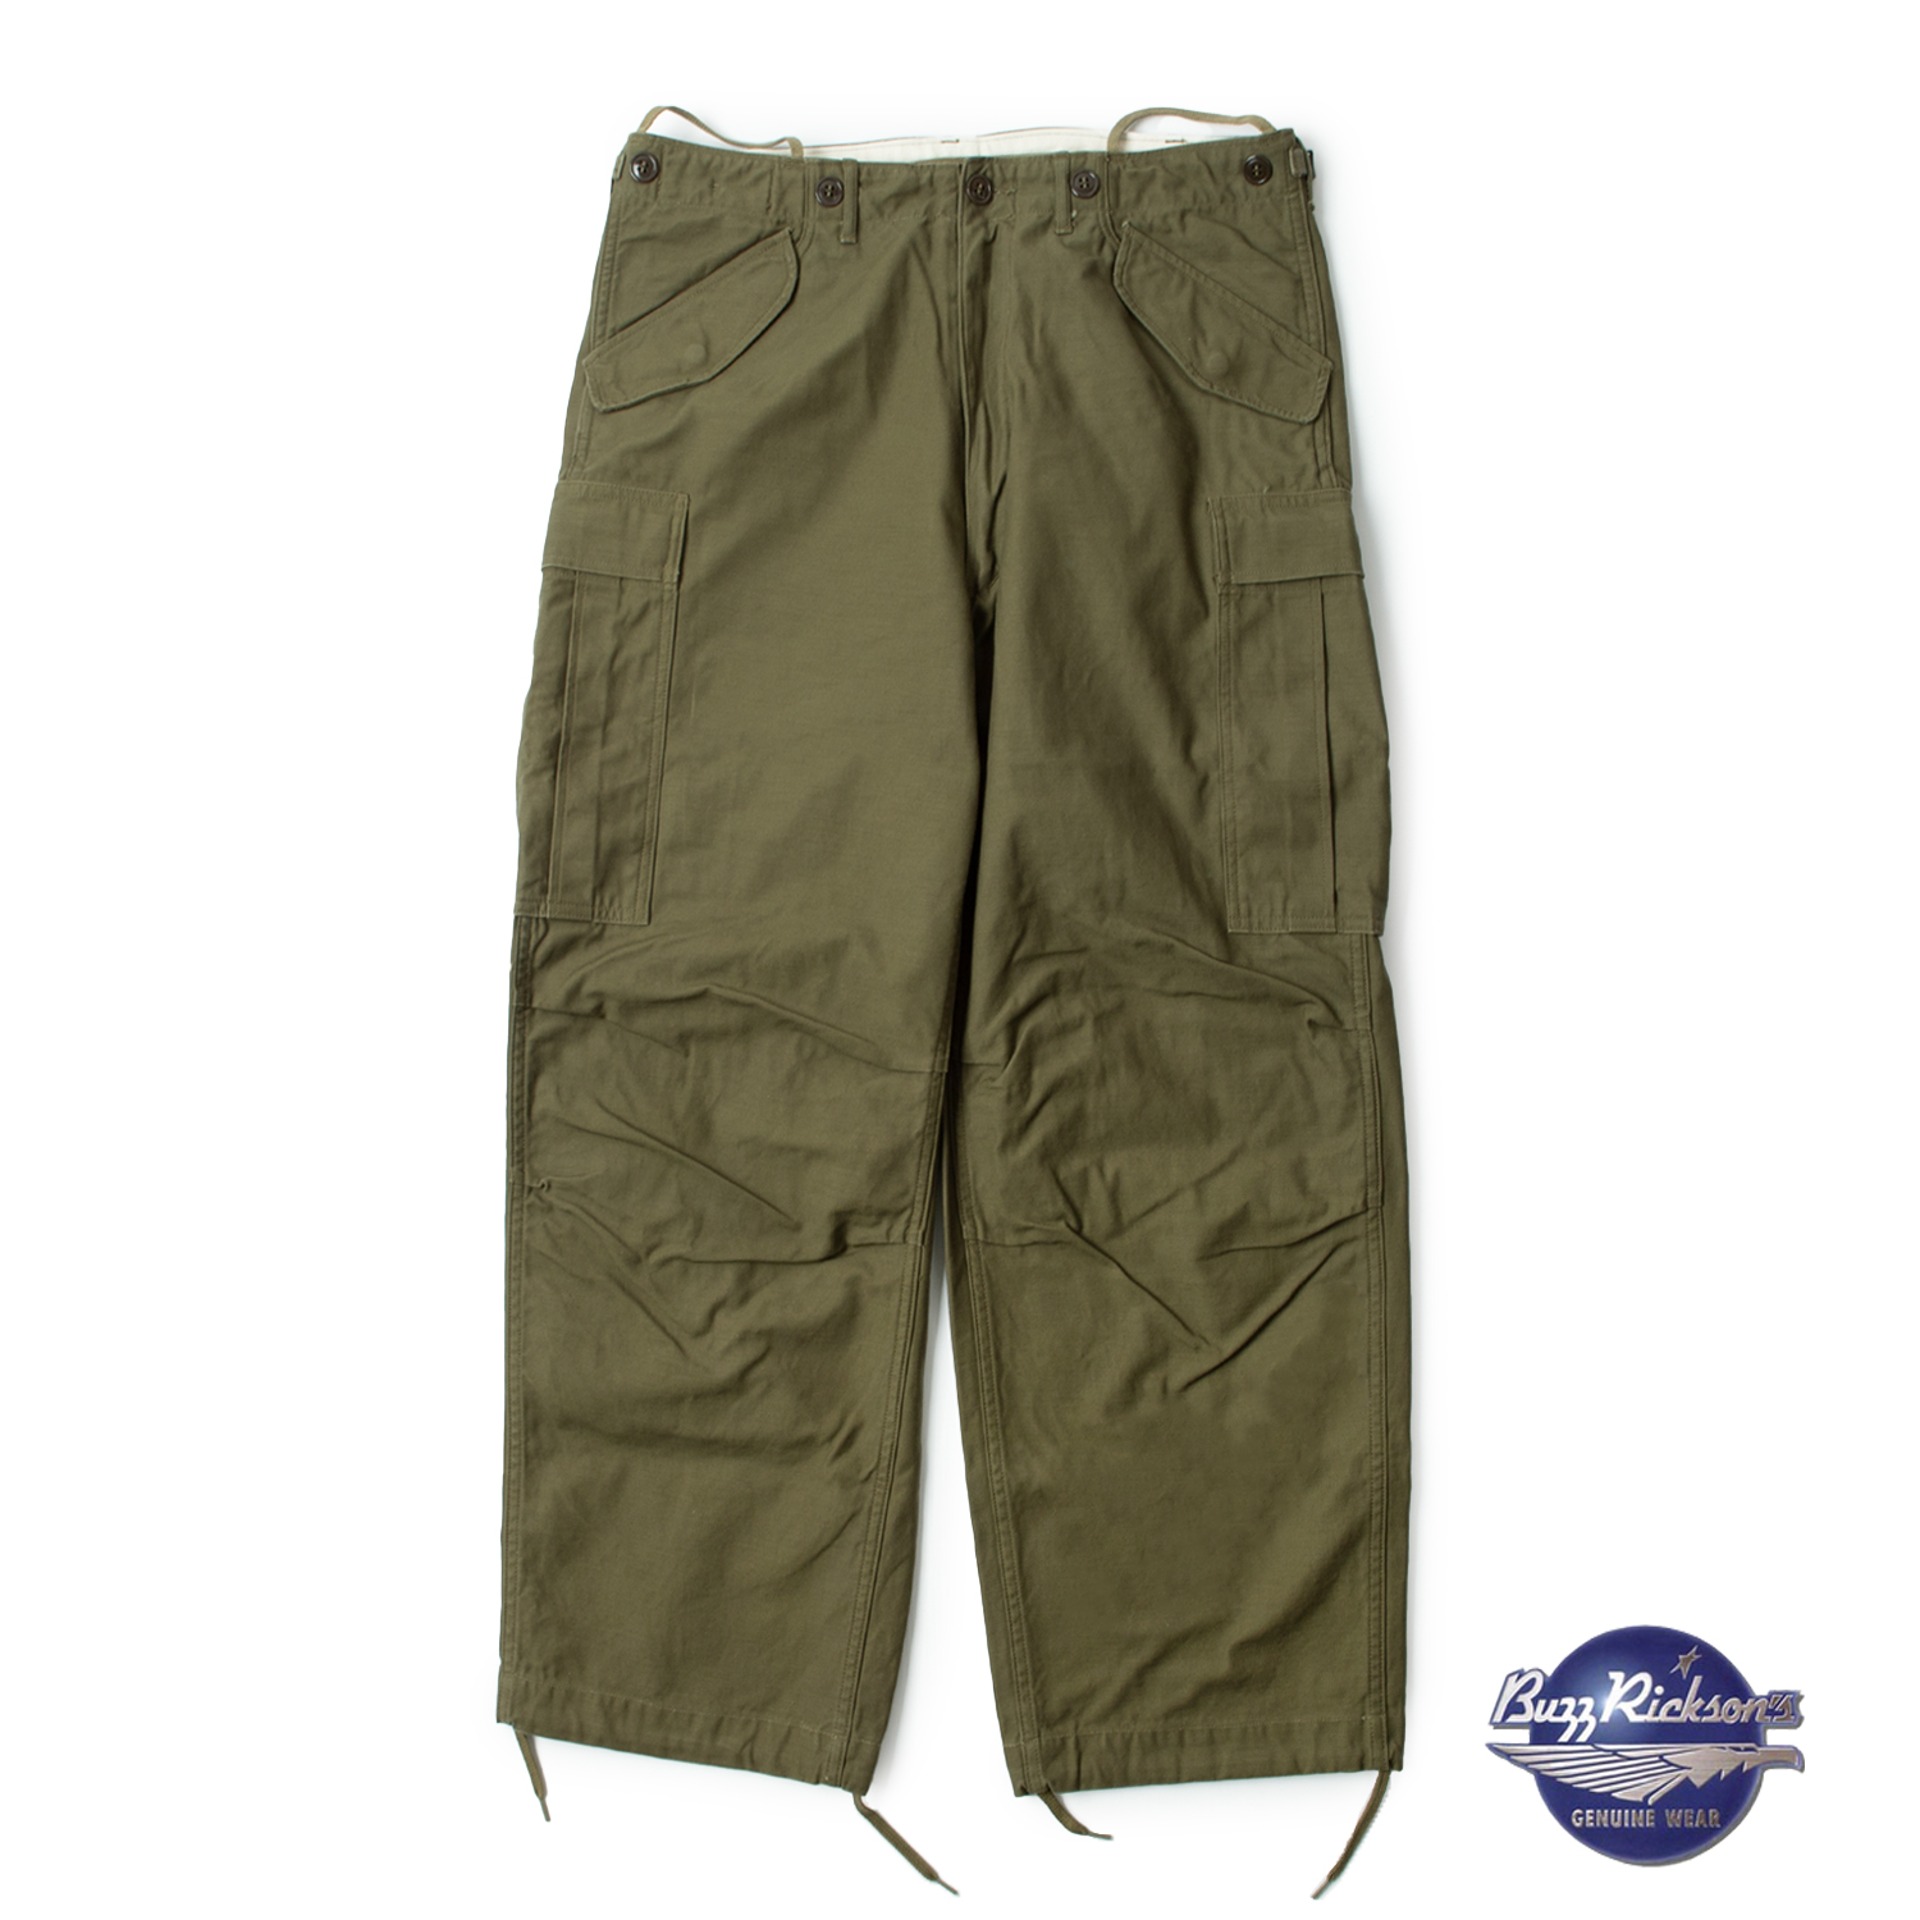 TROUSERS SHELL FIELD M-1951 Short Length (Olive)